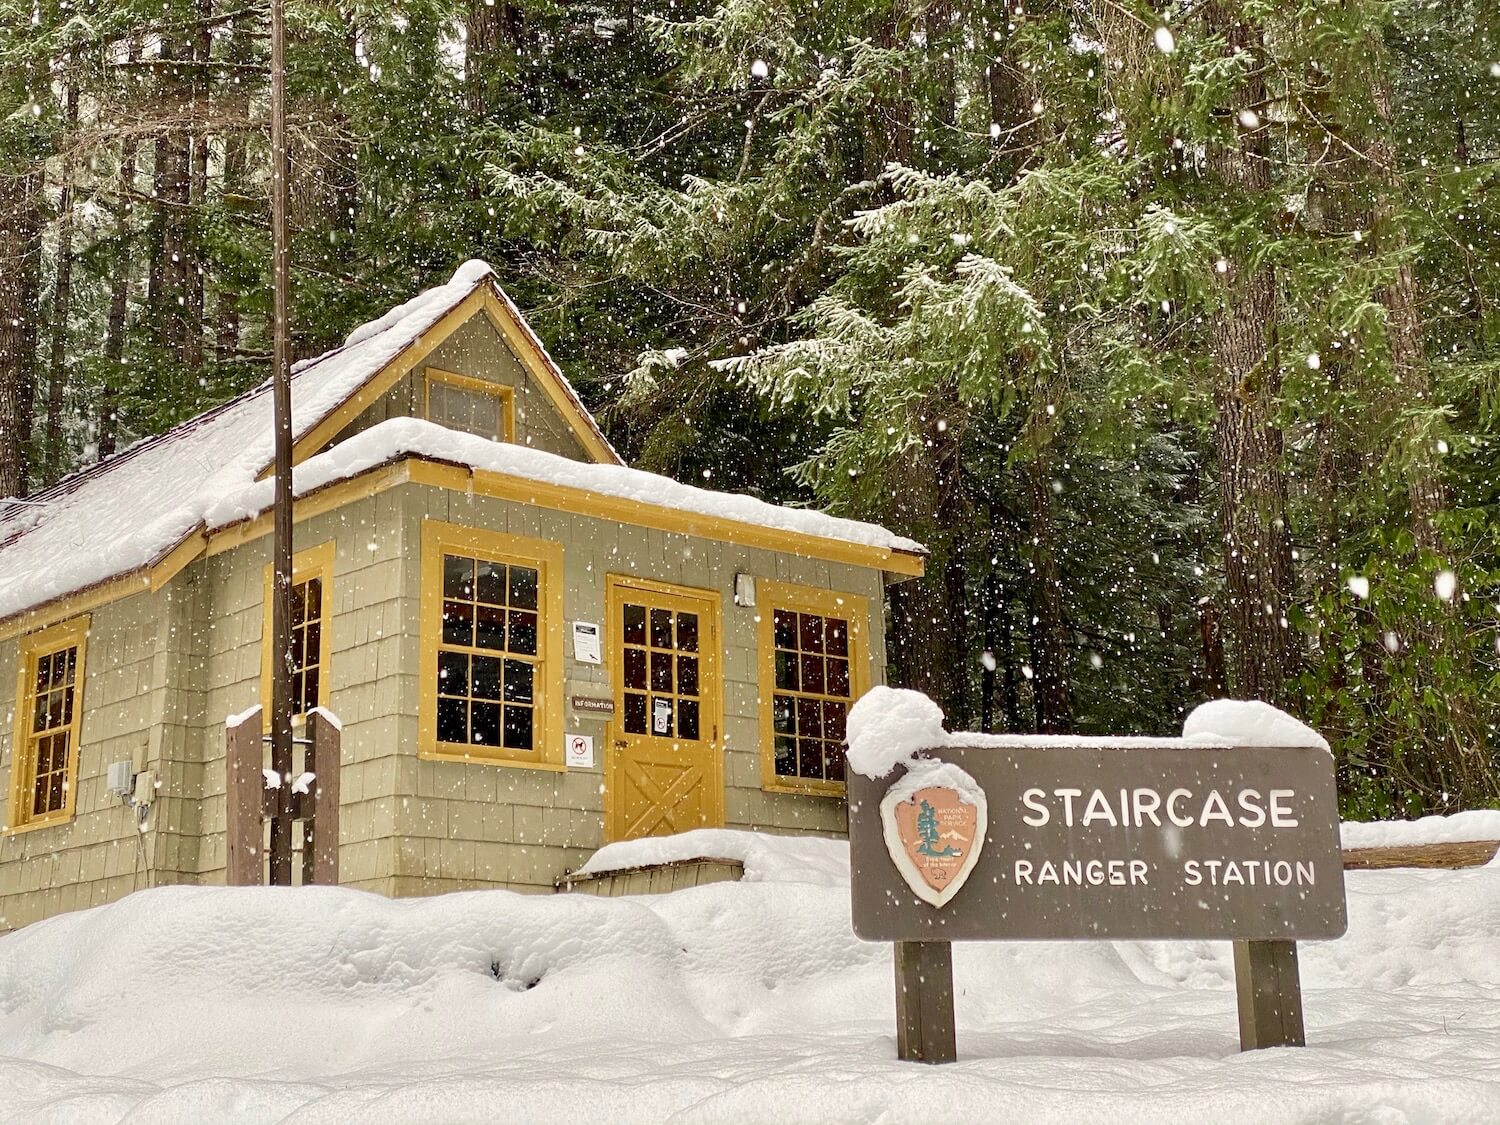 Staircase Ranger Station sign in a snow storm with a green ranger duding with yellow trim. In the background are snow covered fir trees.  A bit hard core for an explore of the Olympic Peninsula.